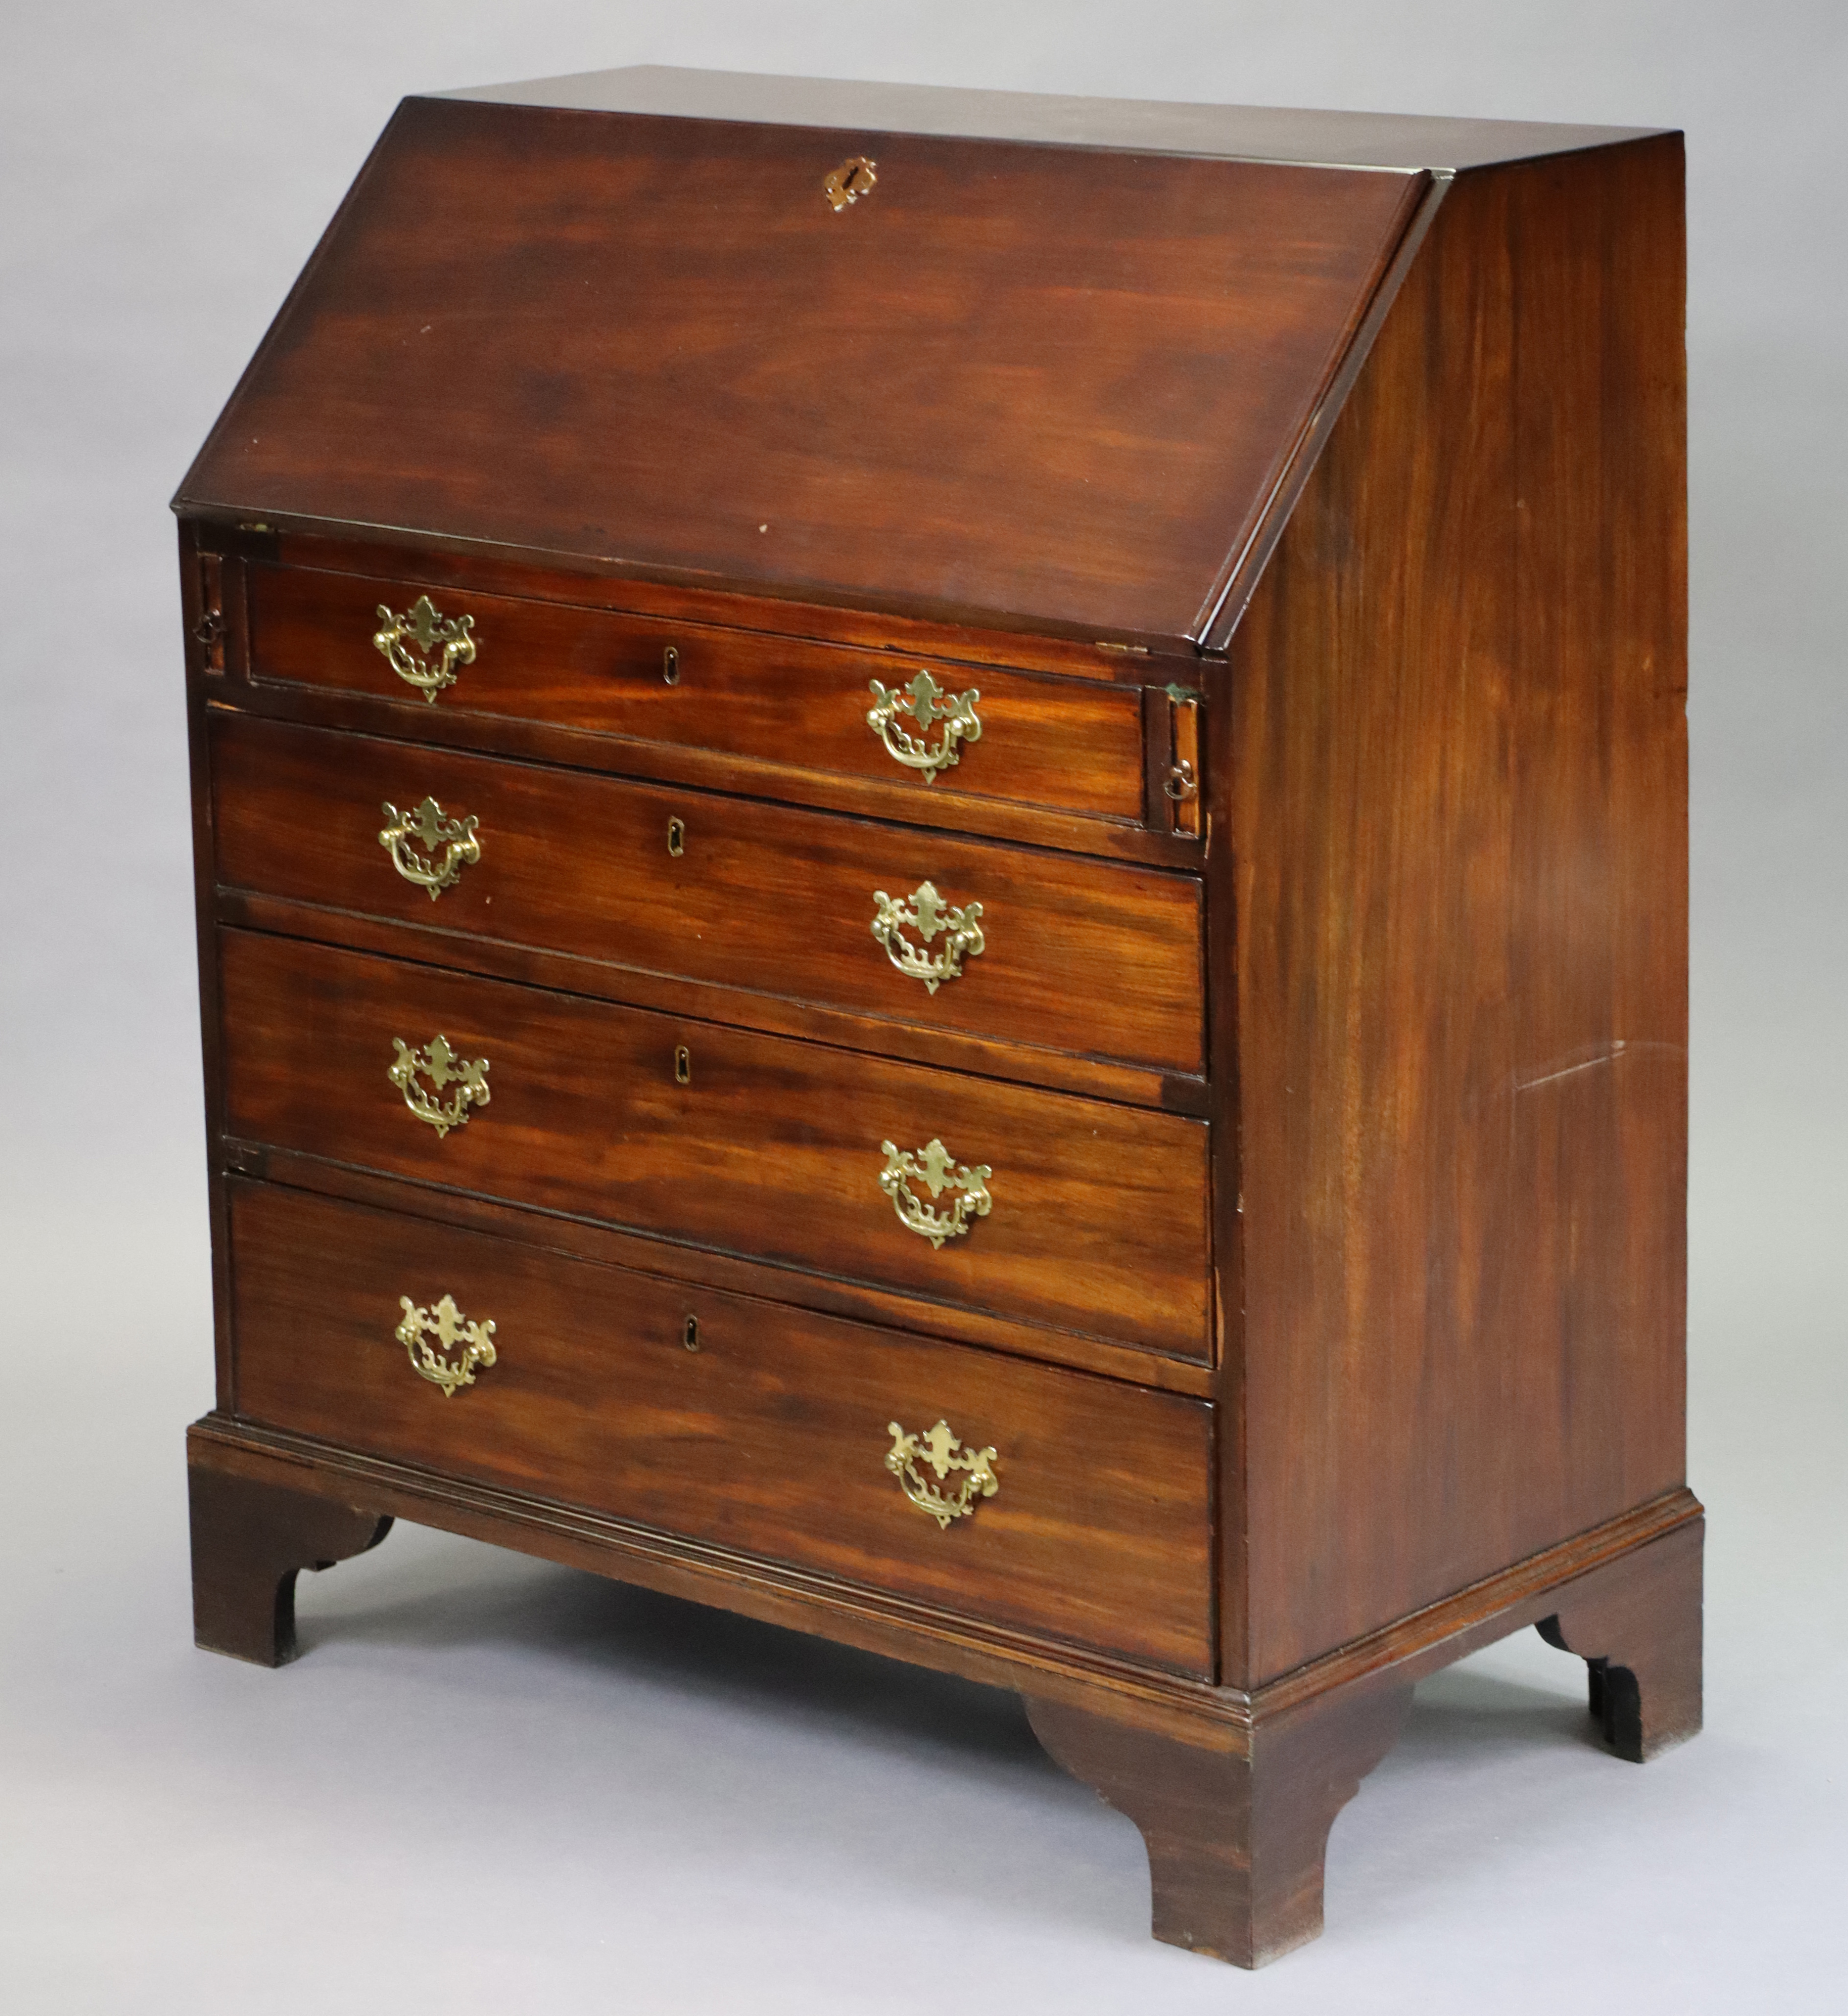 An 18th century mahogany bureau with fitted interior and gilt-tooled leather writing surface